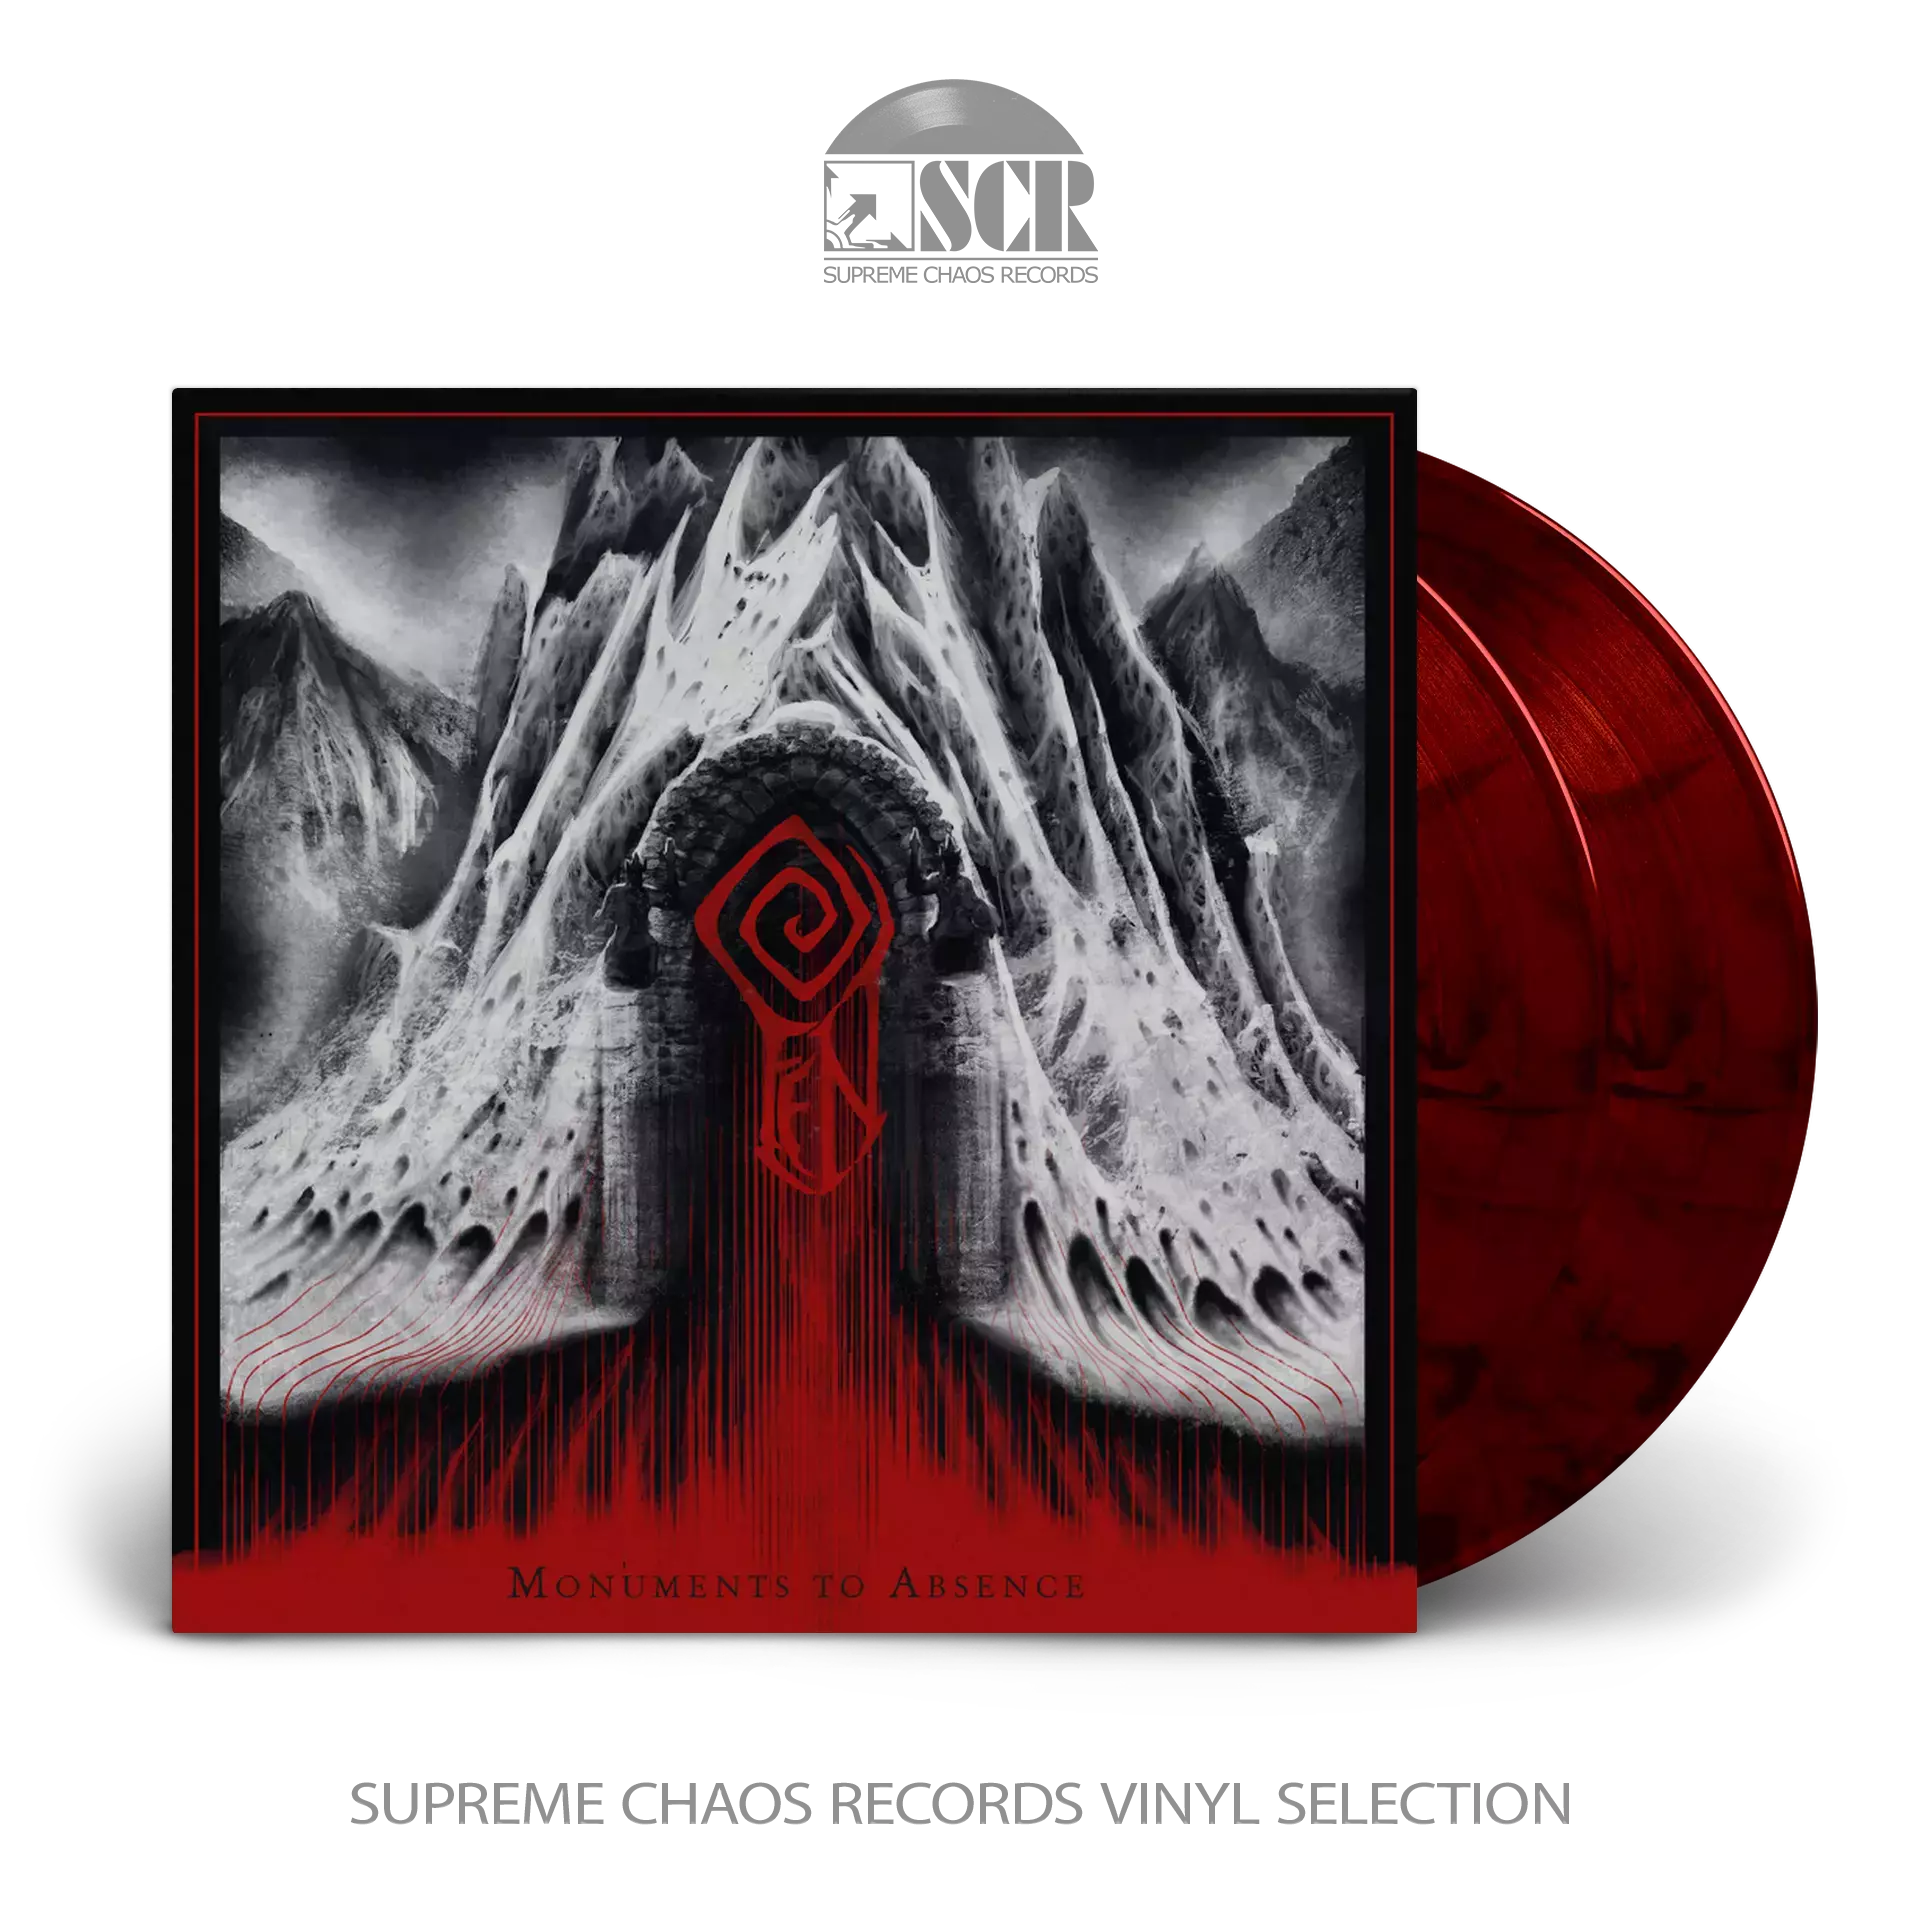 FEN - Monuments to Absence [RED/BLACK MARBLED DLP]